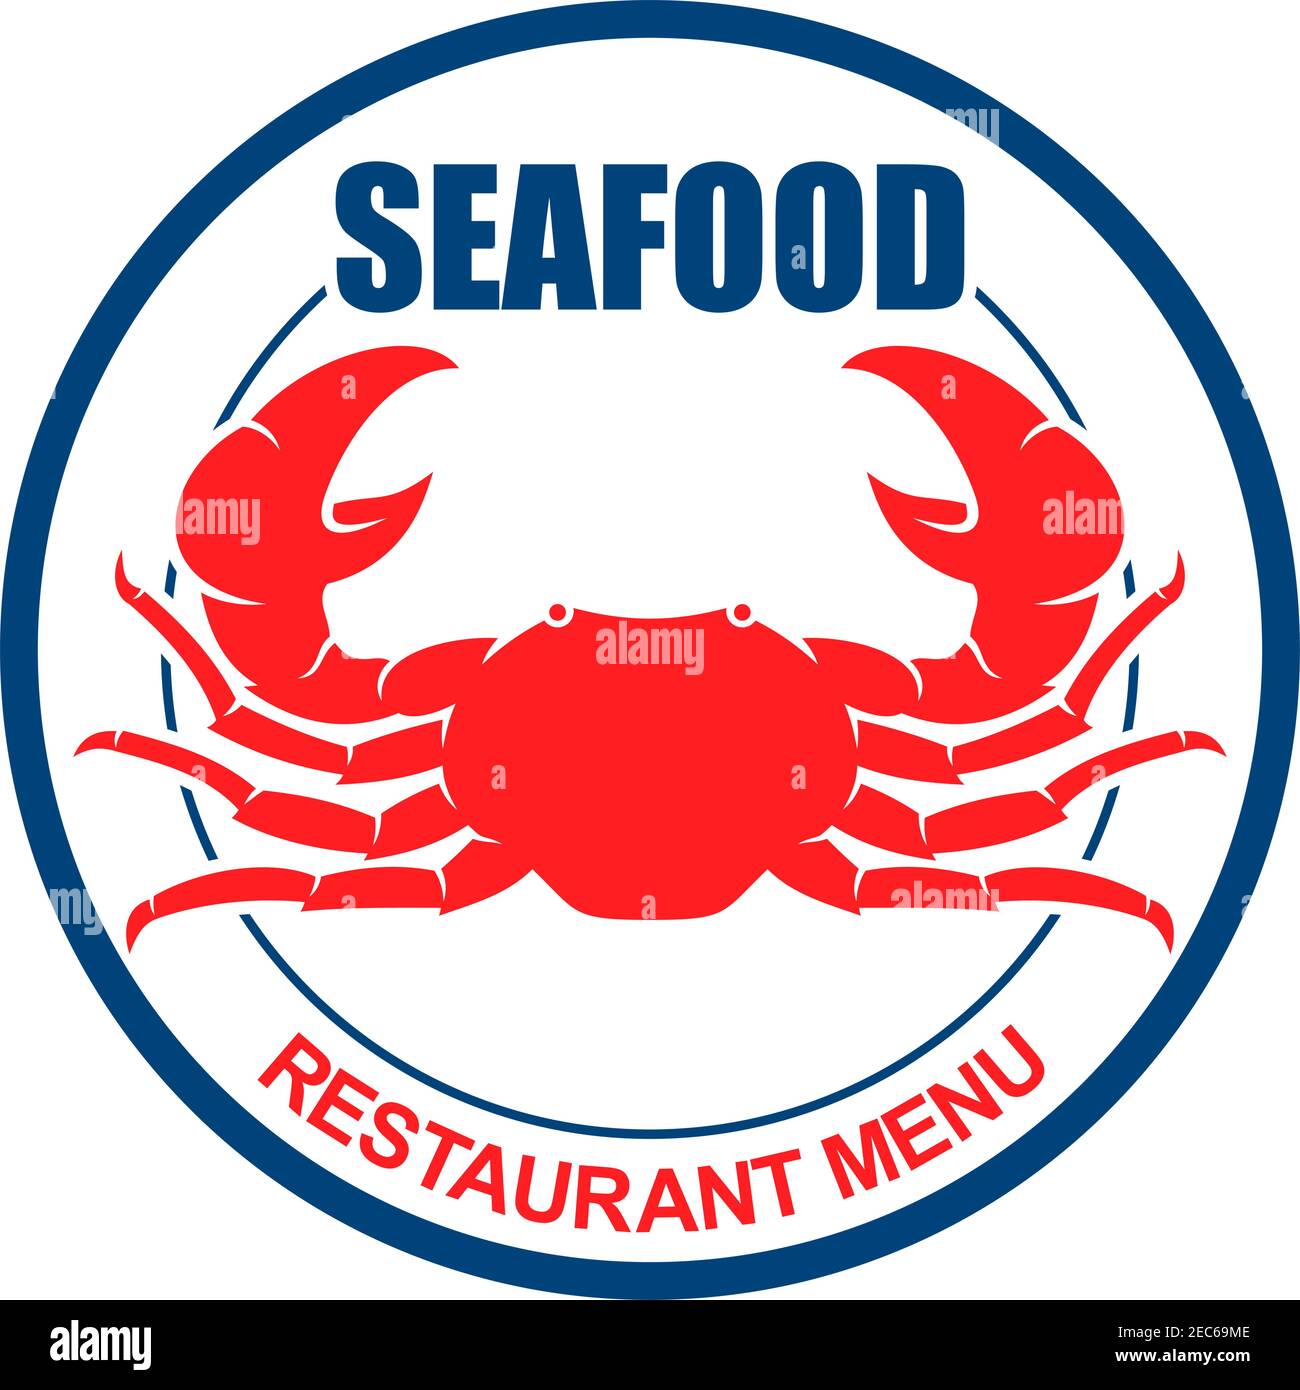 Atlantic red crab on dinner plate with text Seafood and Restaurant Menu. Retro stylized symbol for restaurant or bar menu design Stock Vector